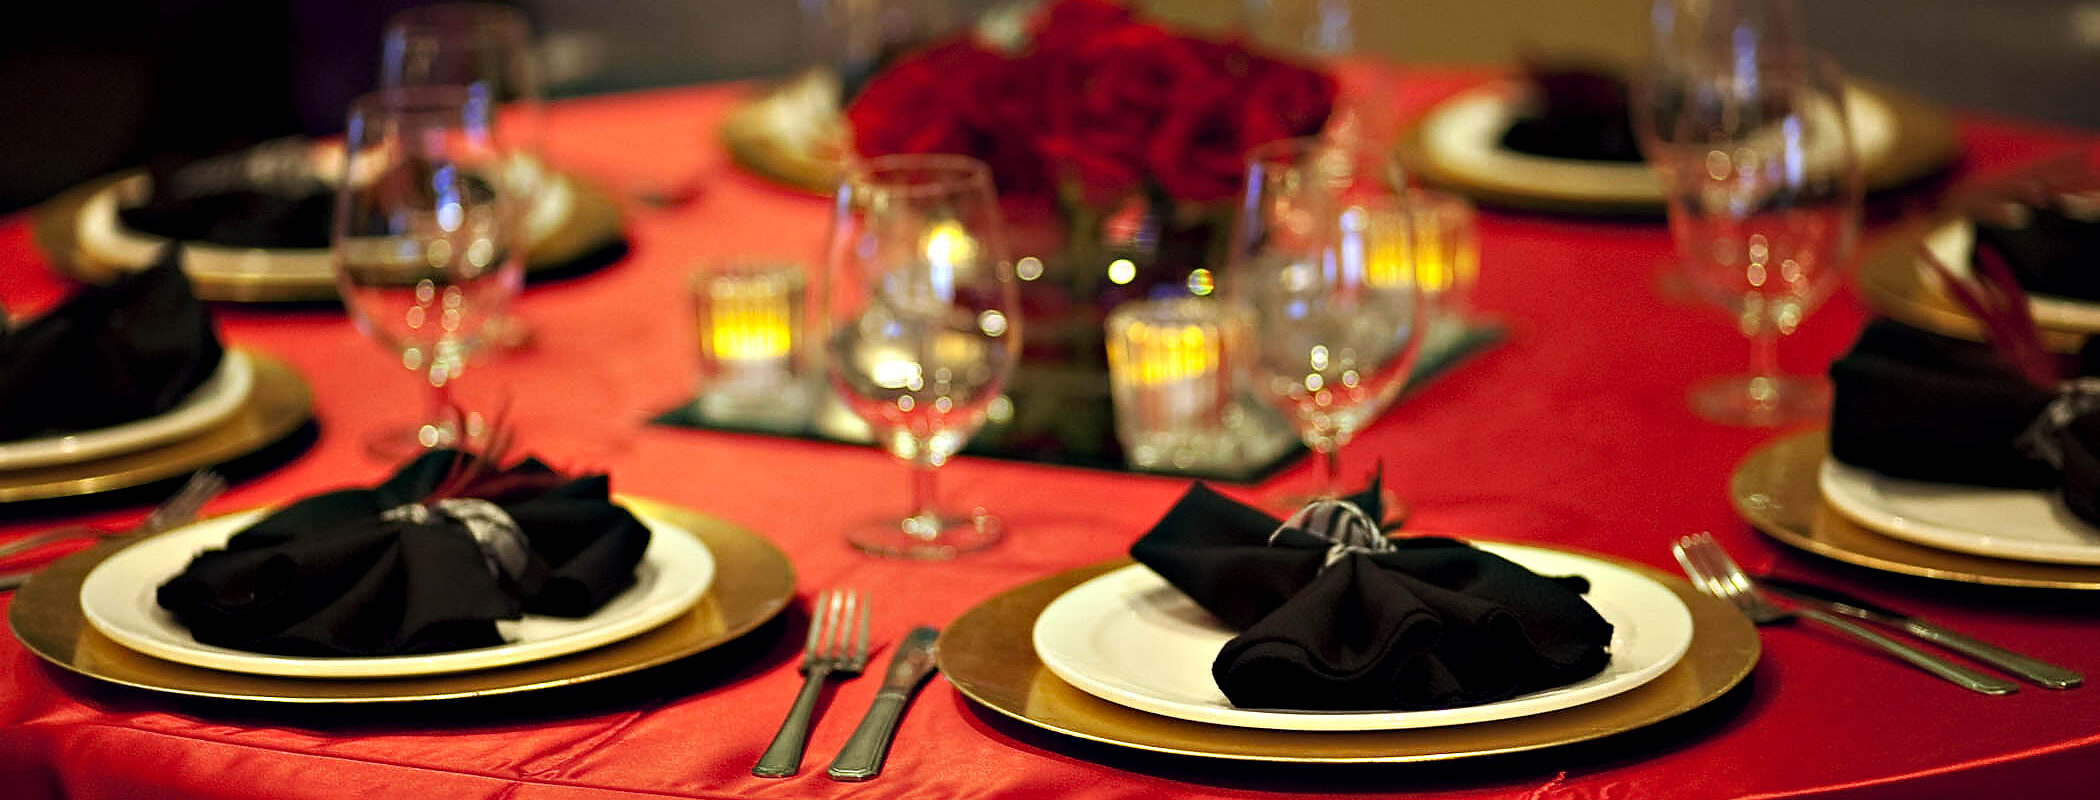 Rehearsal Dinners featured image